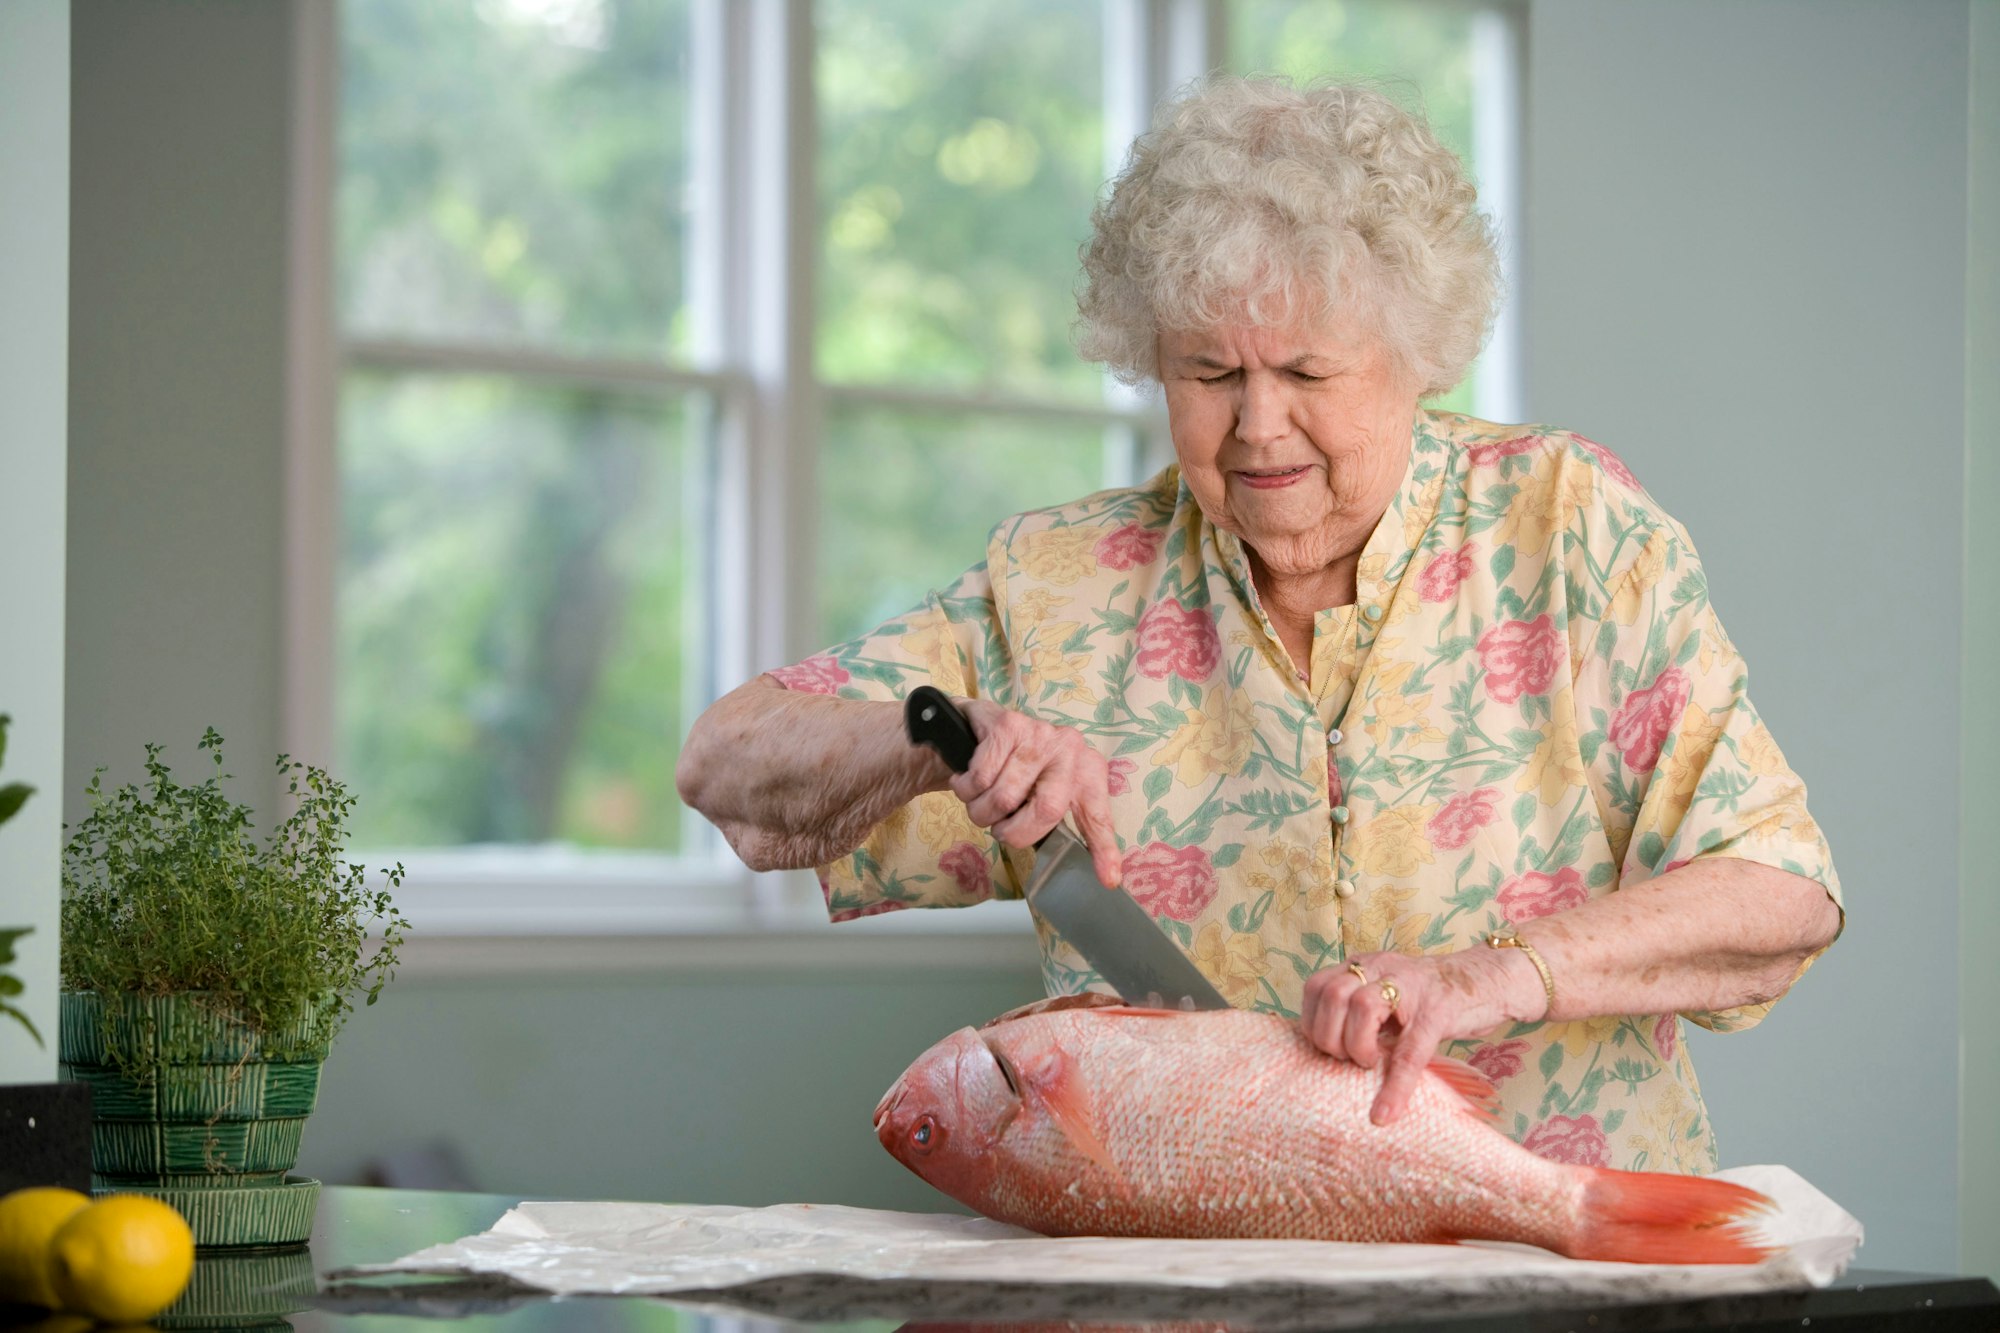 This elderly woman was in the process of preparing a fresh fish on her clean kitchen counter. Carefully using a large knife, the woman had cut into the fish’s belly, and would subsequently extract the internal organs prior to finally cutting away the fillets.